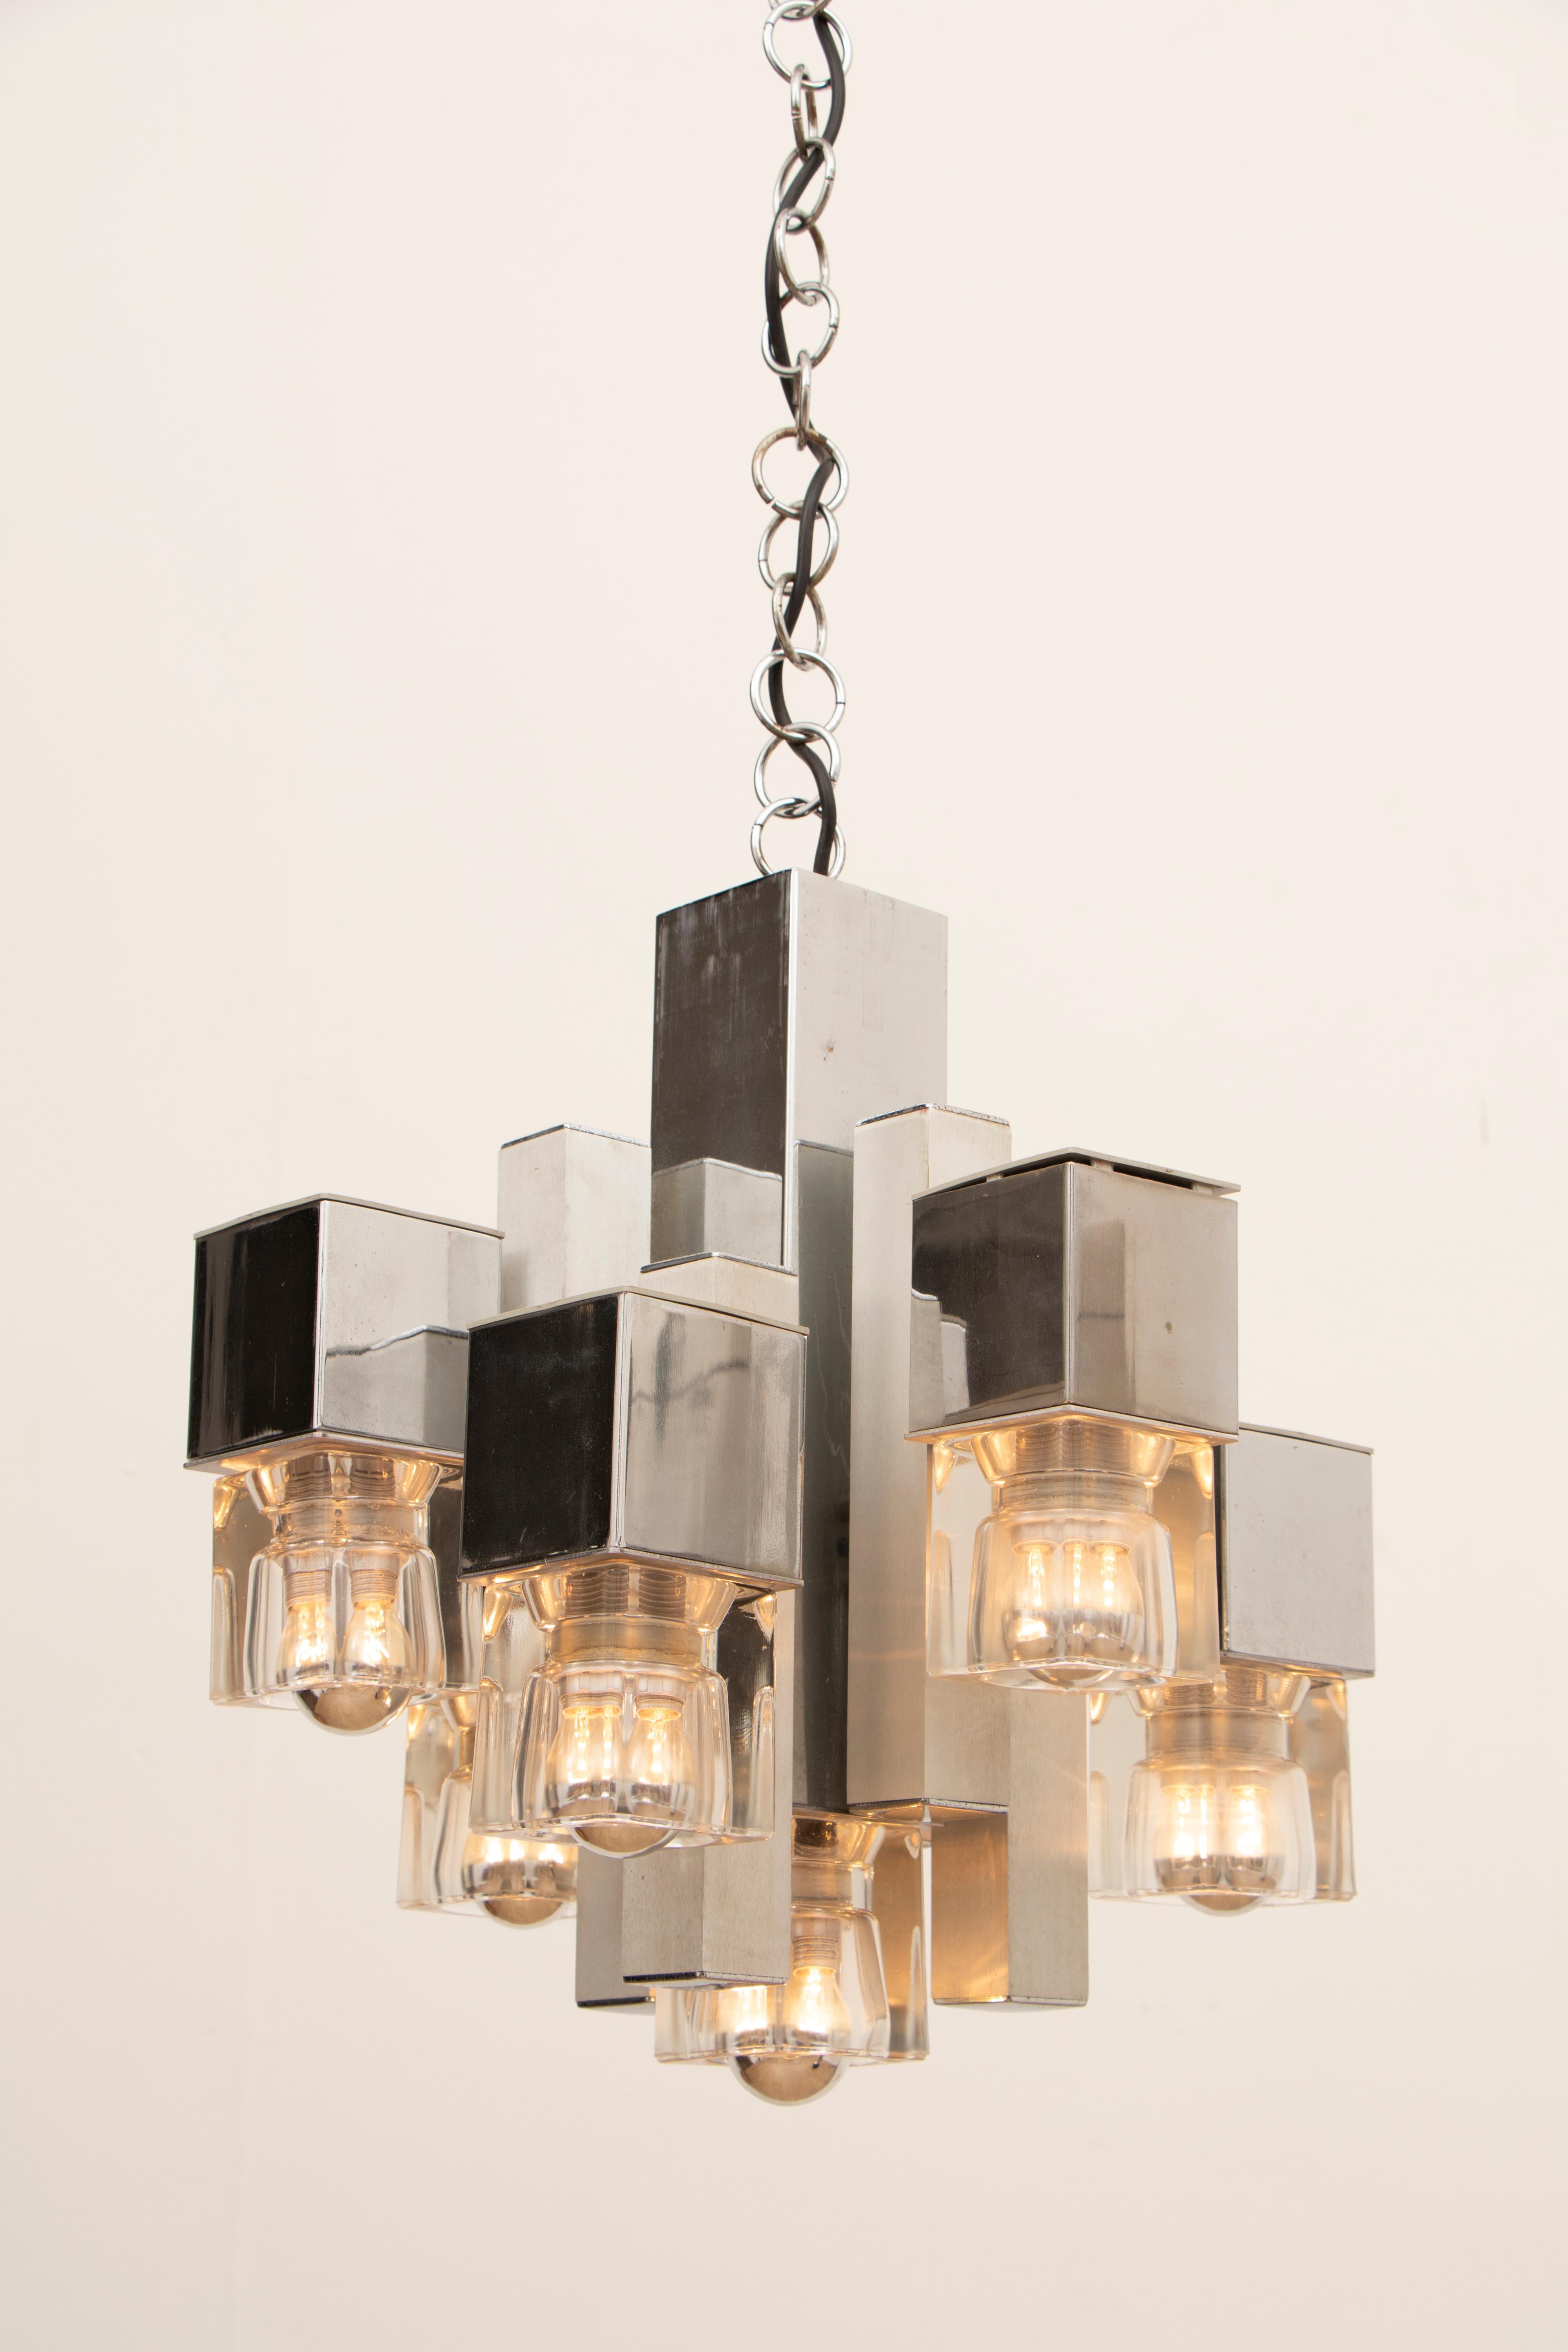 1970s Italian abstract cubic ceiling hanging light designed by Gaetano Sciolari. The staggered cubic shapes which are made of chromed metal and aluminium with heavy glass cubes at the end of each one. A screw-in E14 bulb is required within each